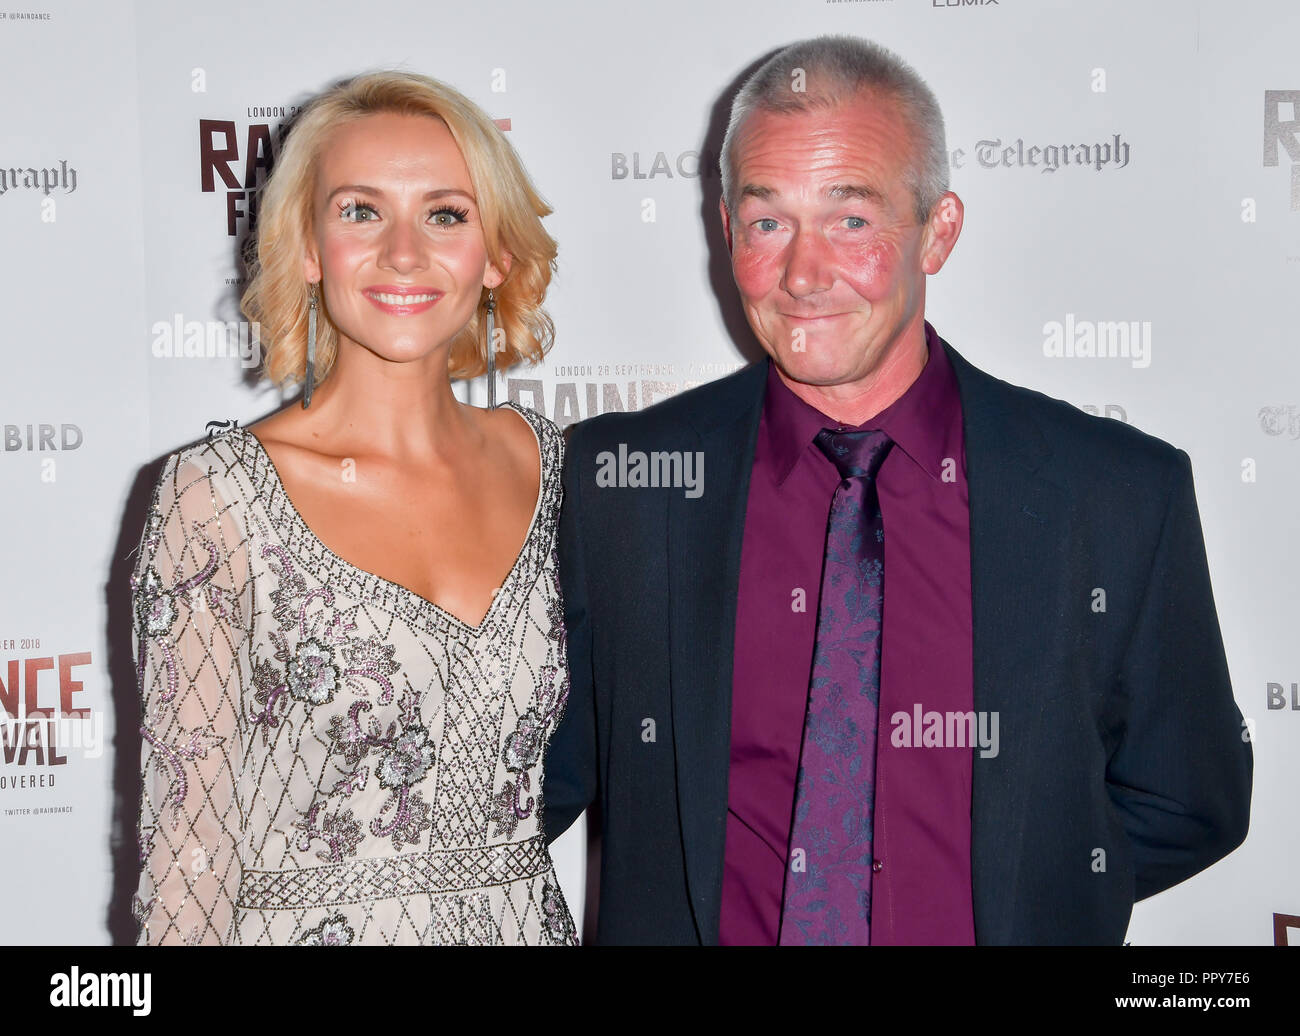 London, UK. 28th September, 2018. Nicole Evans attend Blackbird - World Premiere with Michael Flatley at May Fair Hotel, London, UK. 28th September 2018. Credit: Picture Capital/Alamy Live News Stock Photo